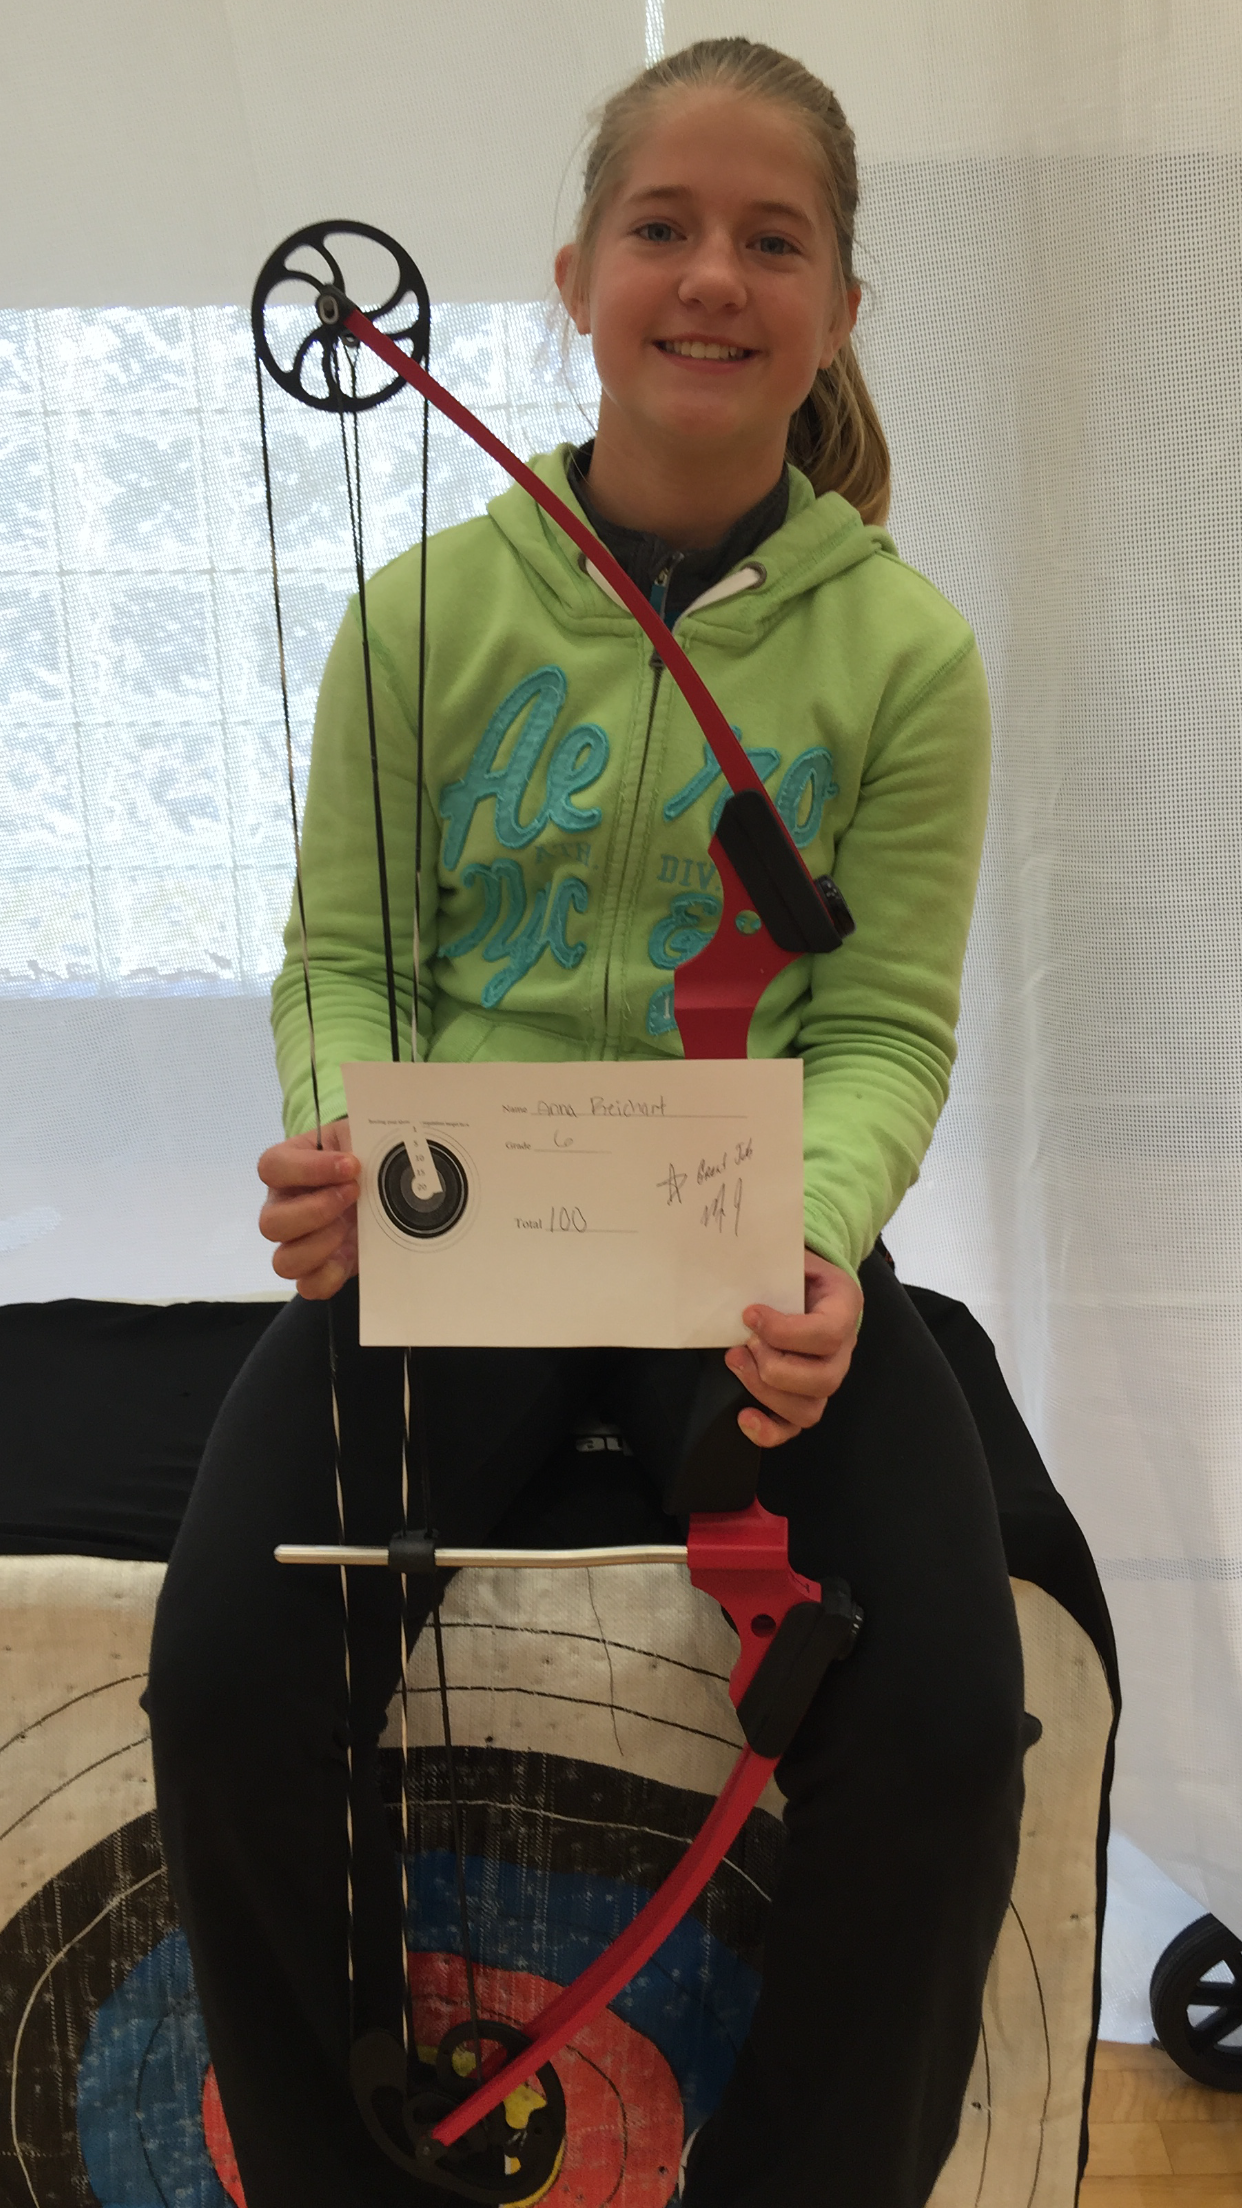 6th grader Anna Reichart scores a perfect 100 in archery class